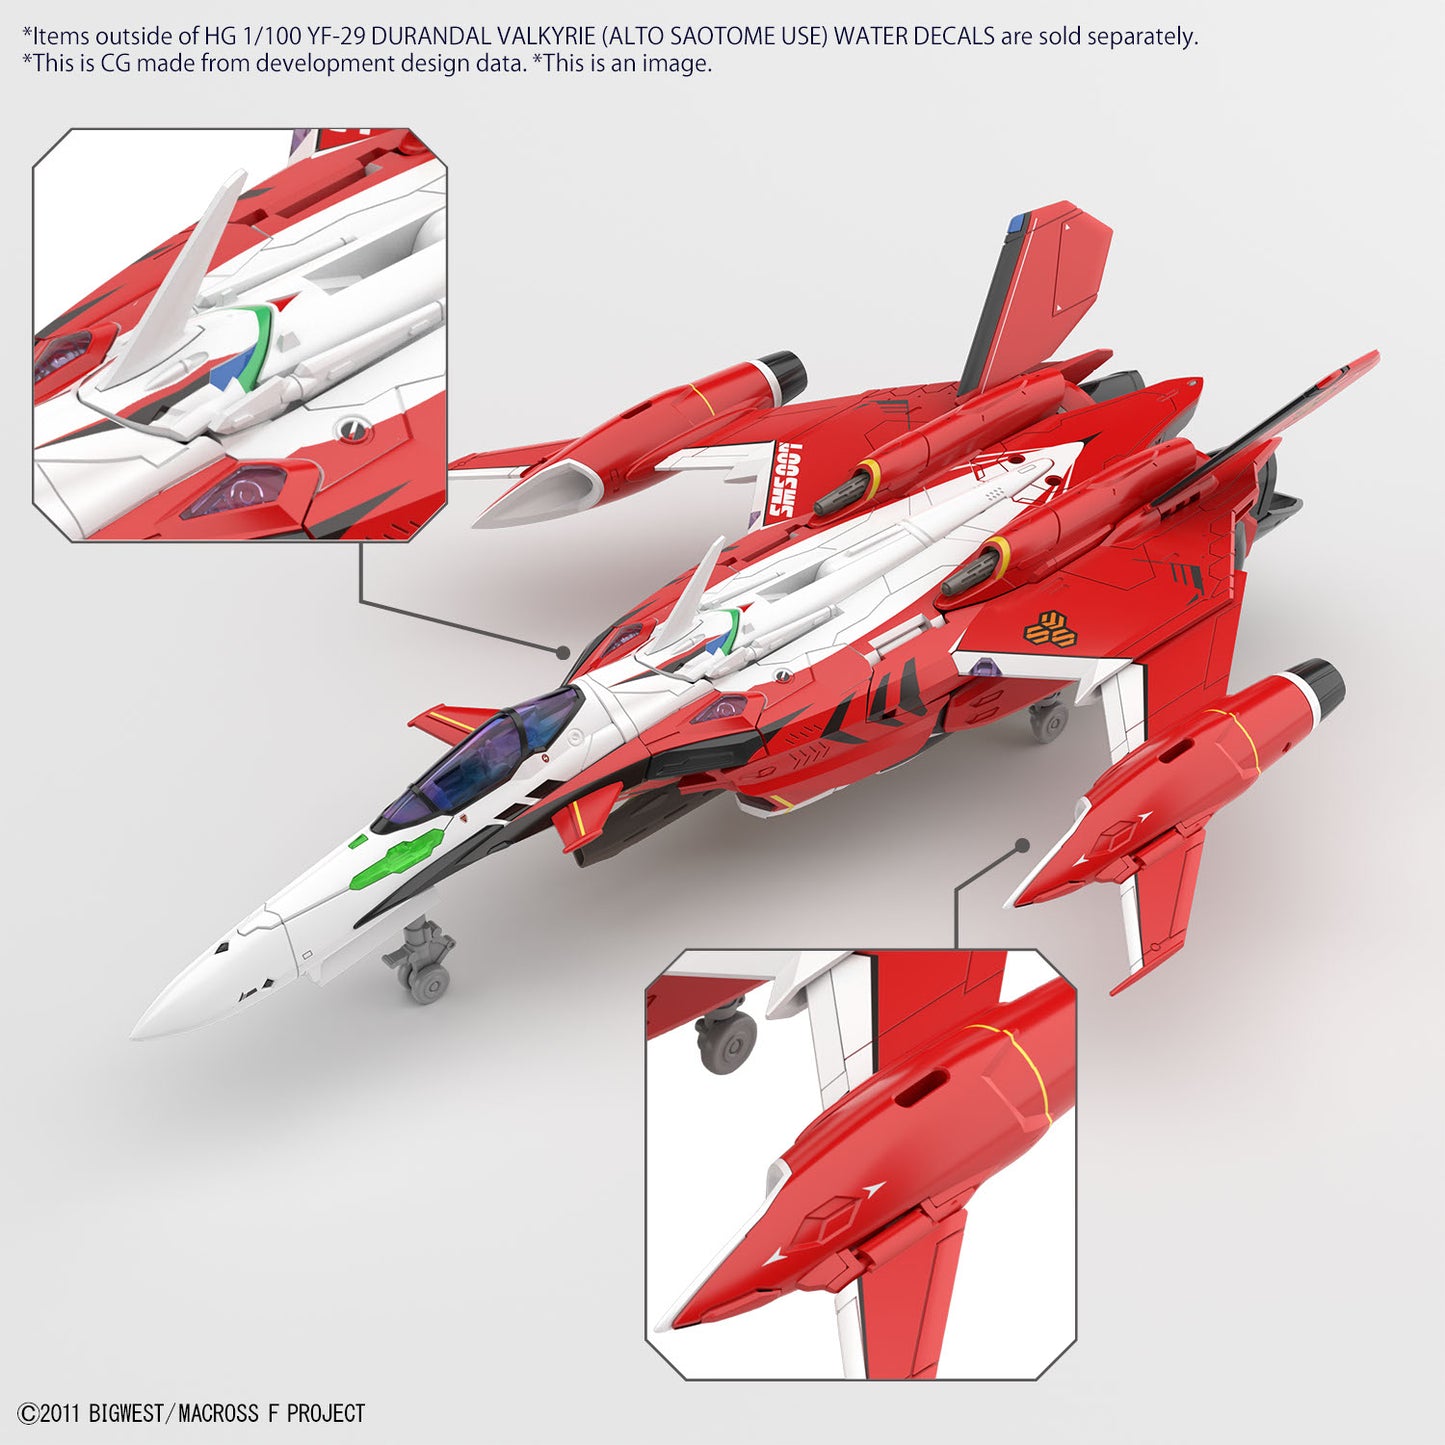 HG 1/100 YF-29 DURANDAL VALKYRIE (ALTO SAOTOME USE) WATER DECALS